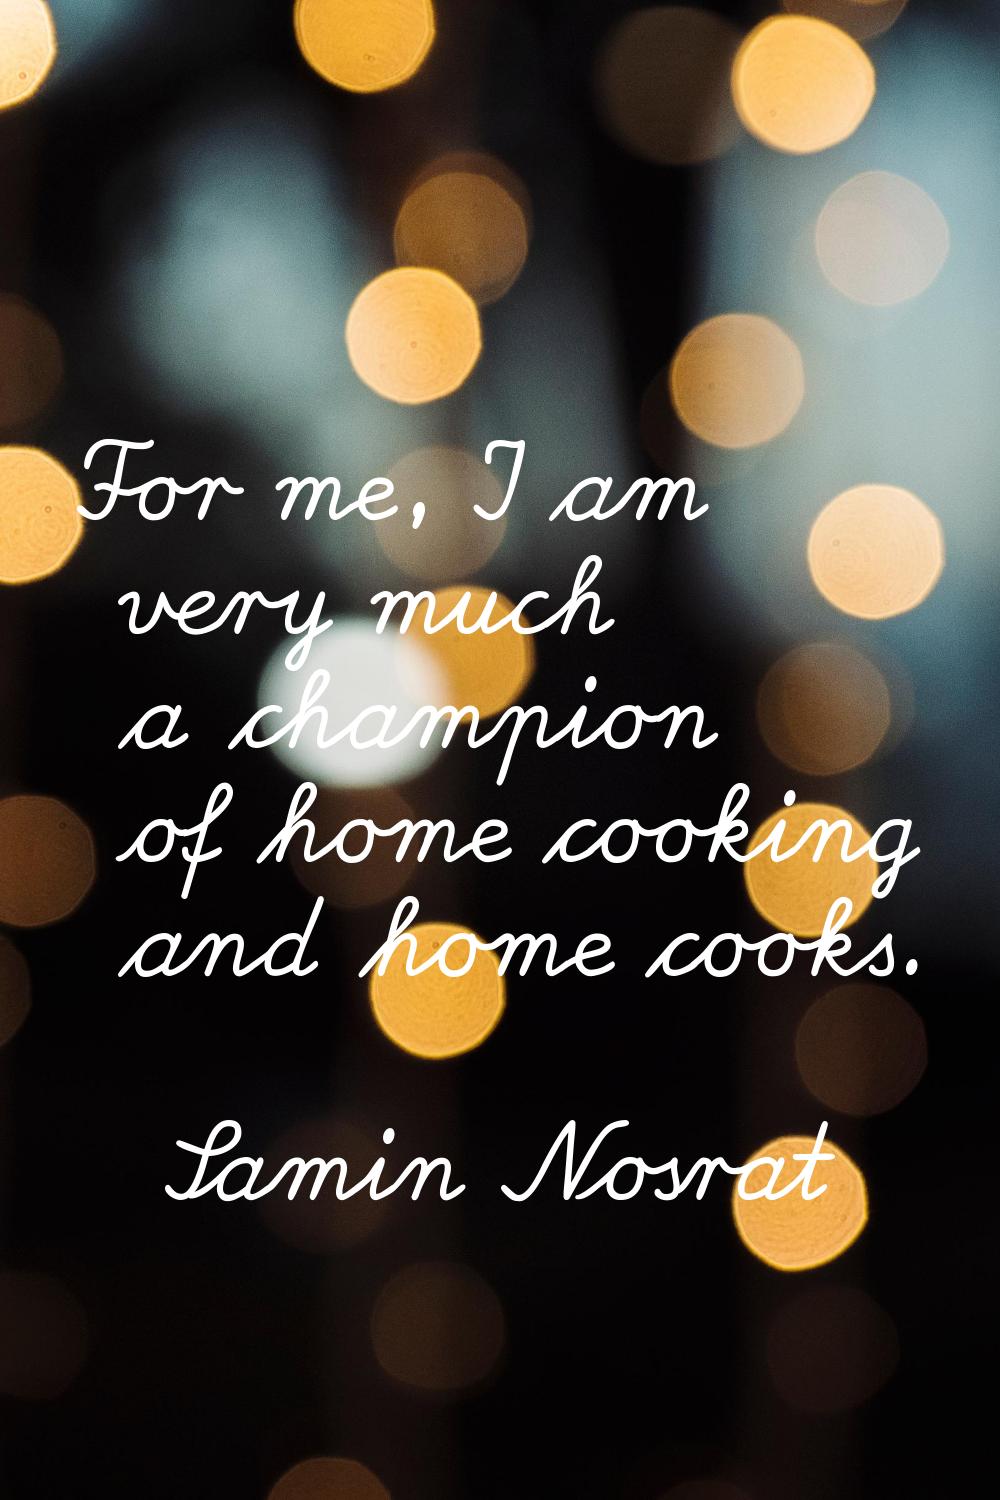 For me, I am very much a champion of home cooking and home cooks.